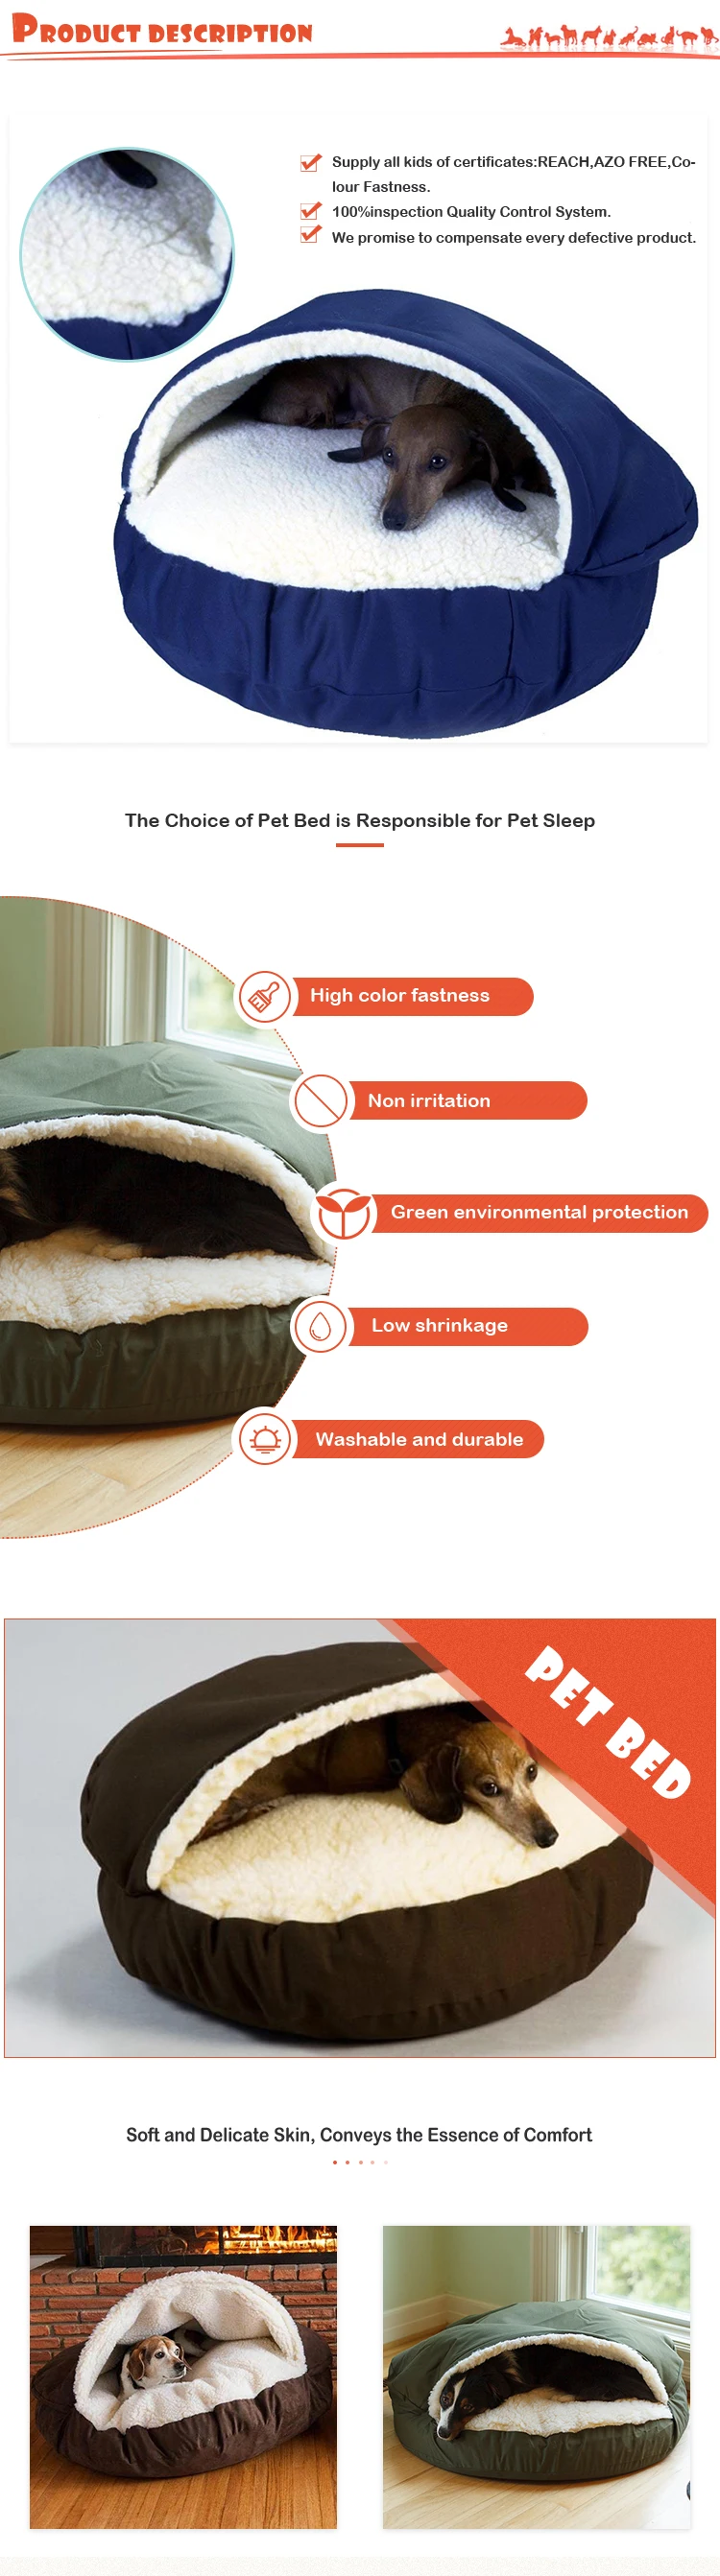 New Design small Dog Cave Bed, Stylish Hooded Pet Bed, 100% Cotton Breathable Dog Sleeping Bag